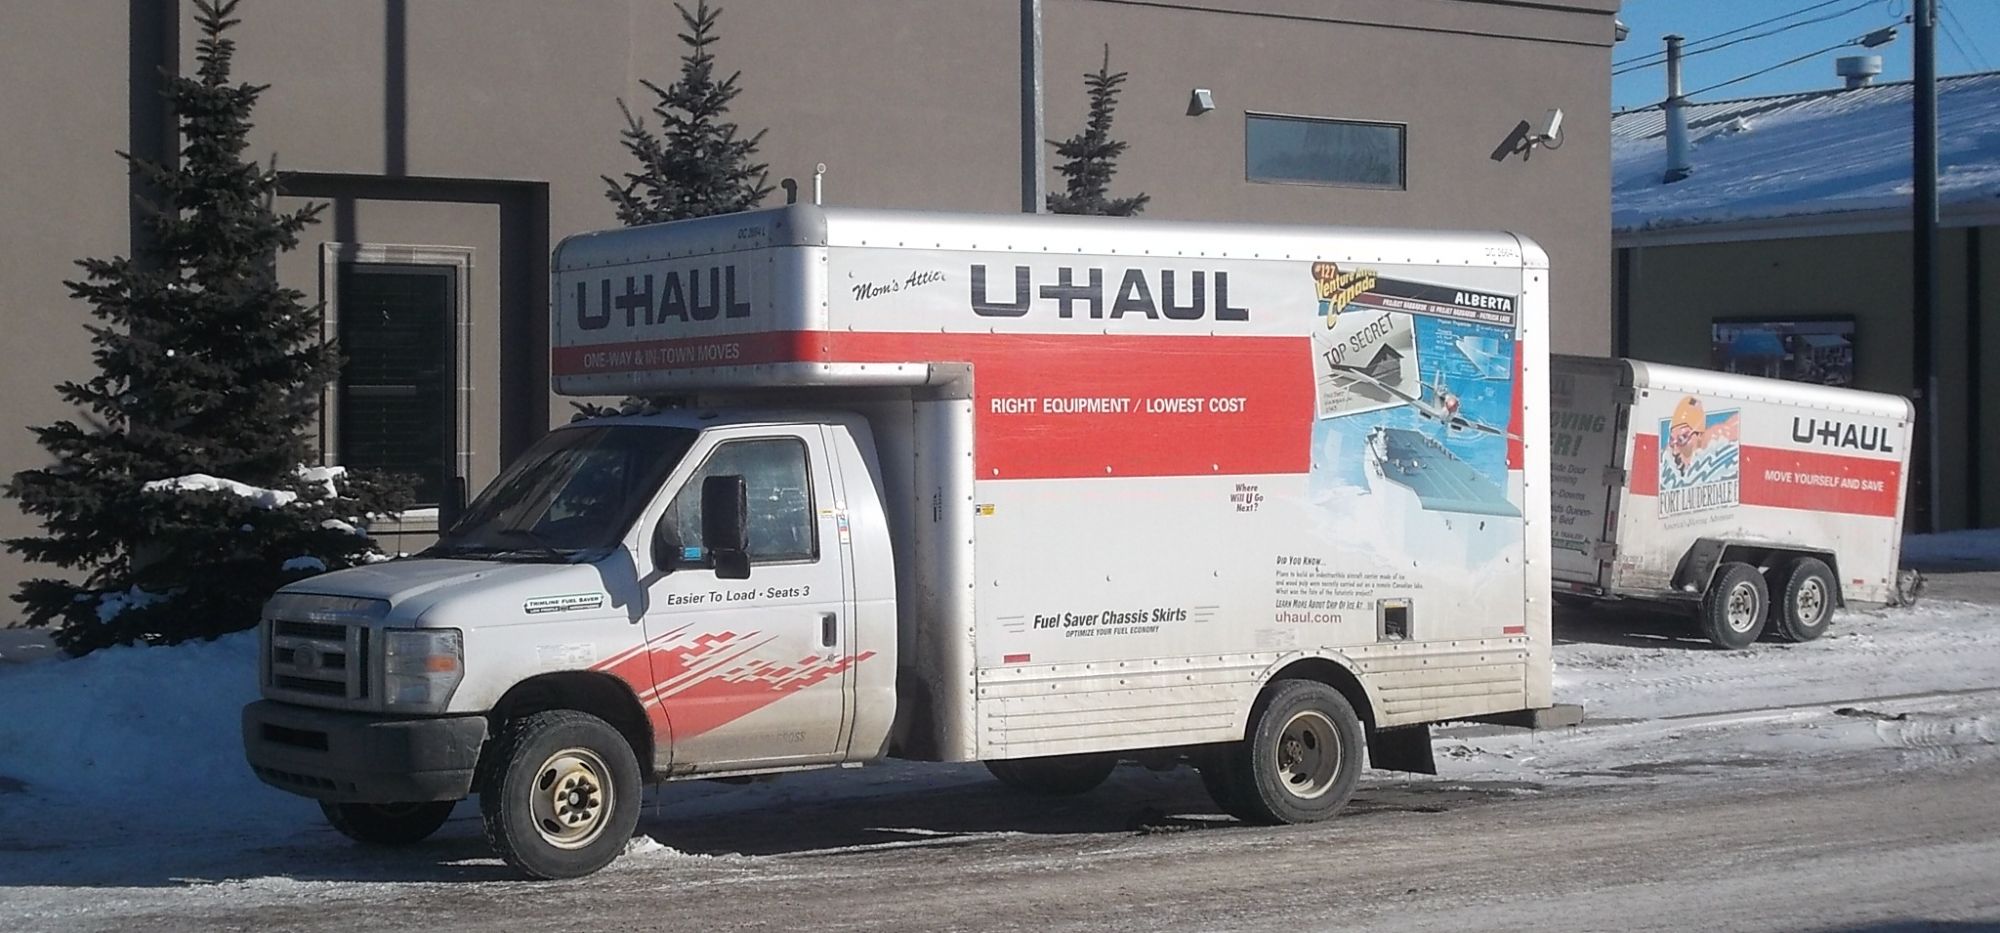 Call to make your U-haul rservations 